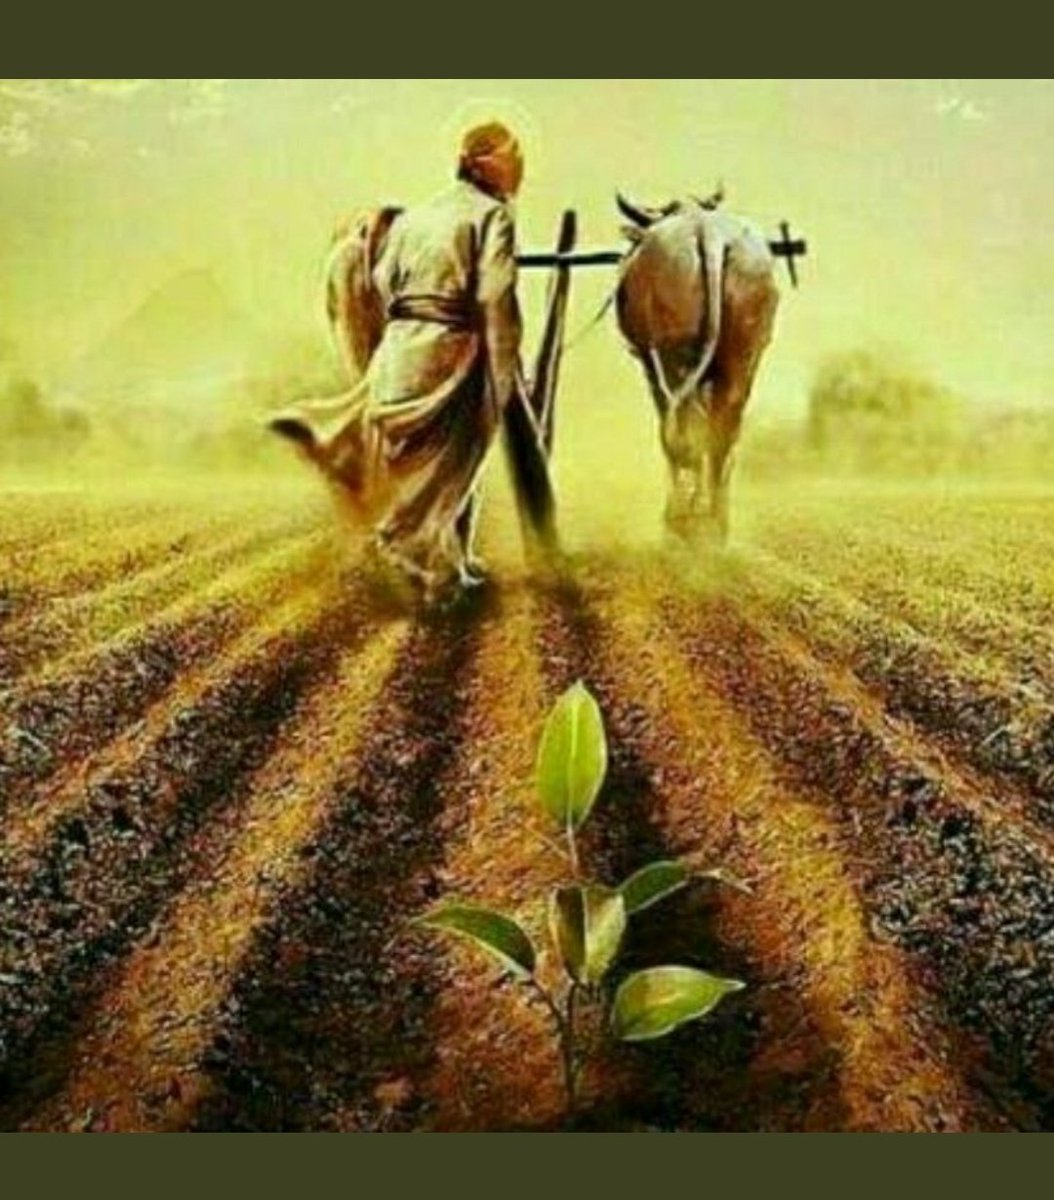 Farmers spend days & nights, winters & summers while working in fields.
Farming is not just a profession, it is backbone of rural India and its social fabric.

MSP is Farmers’ right!

#आदिवासी_परिवार_स्थापना_दिवस
#MSP_गारंटी_कानून_बनाओ